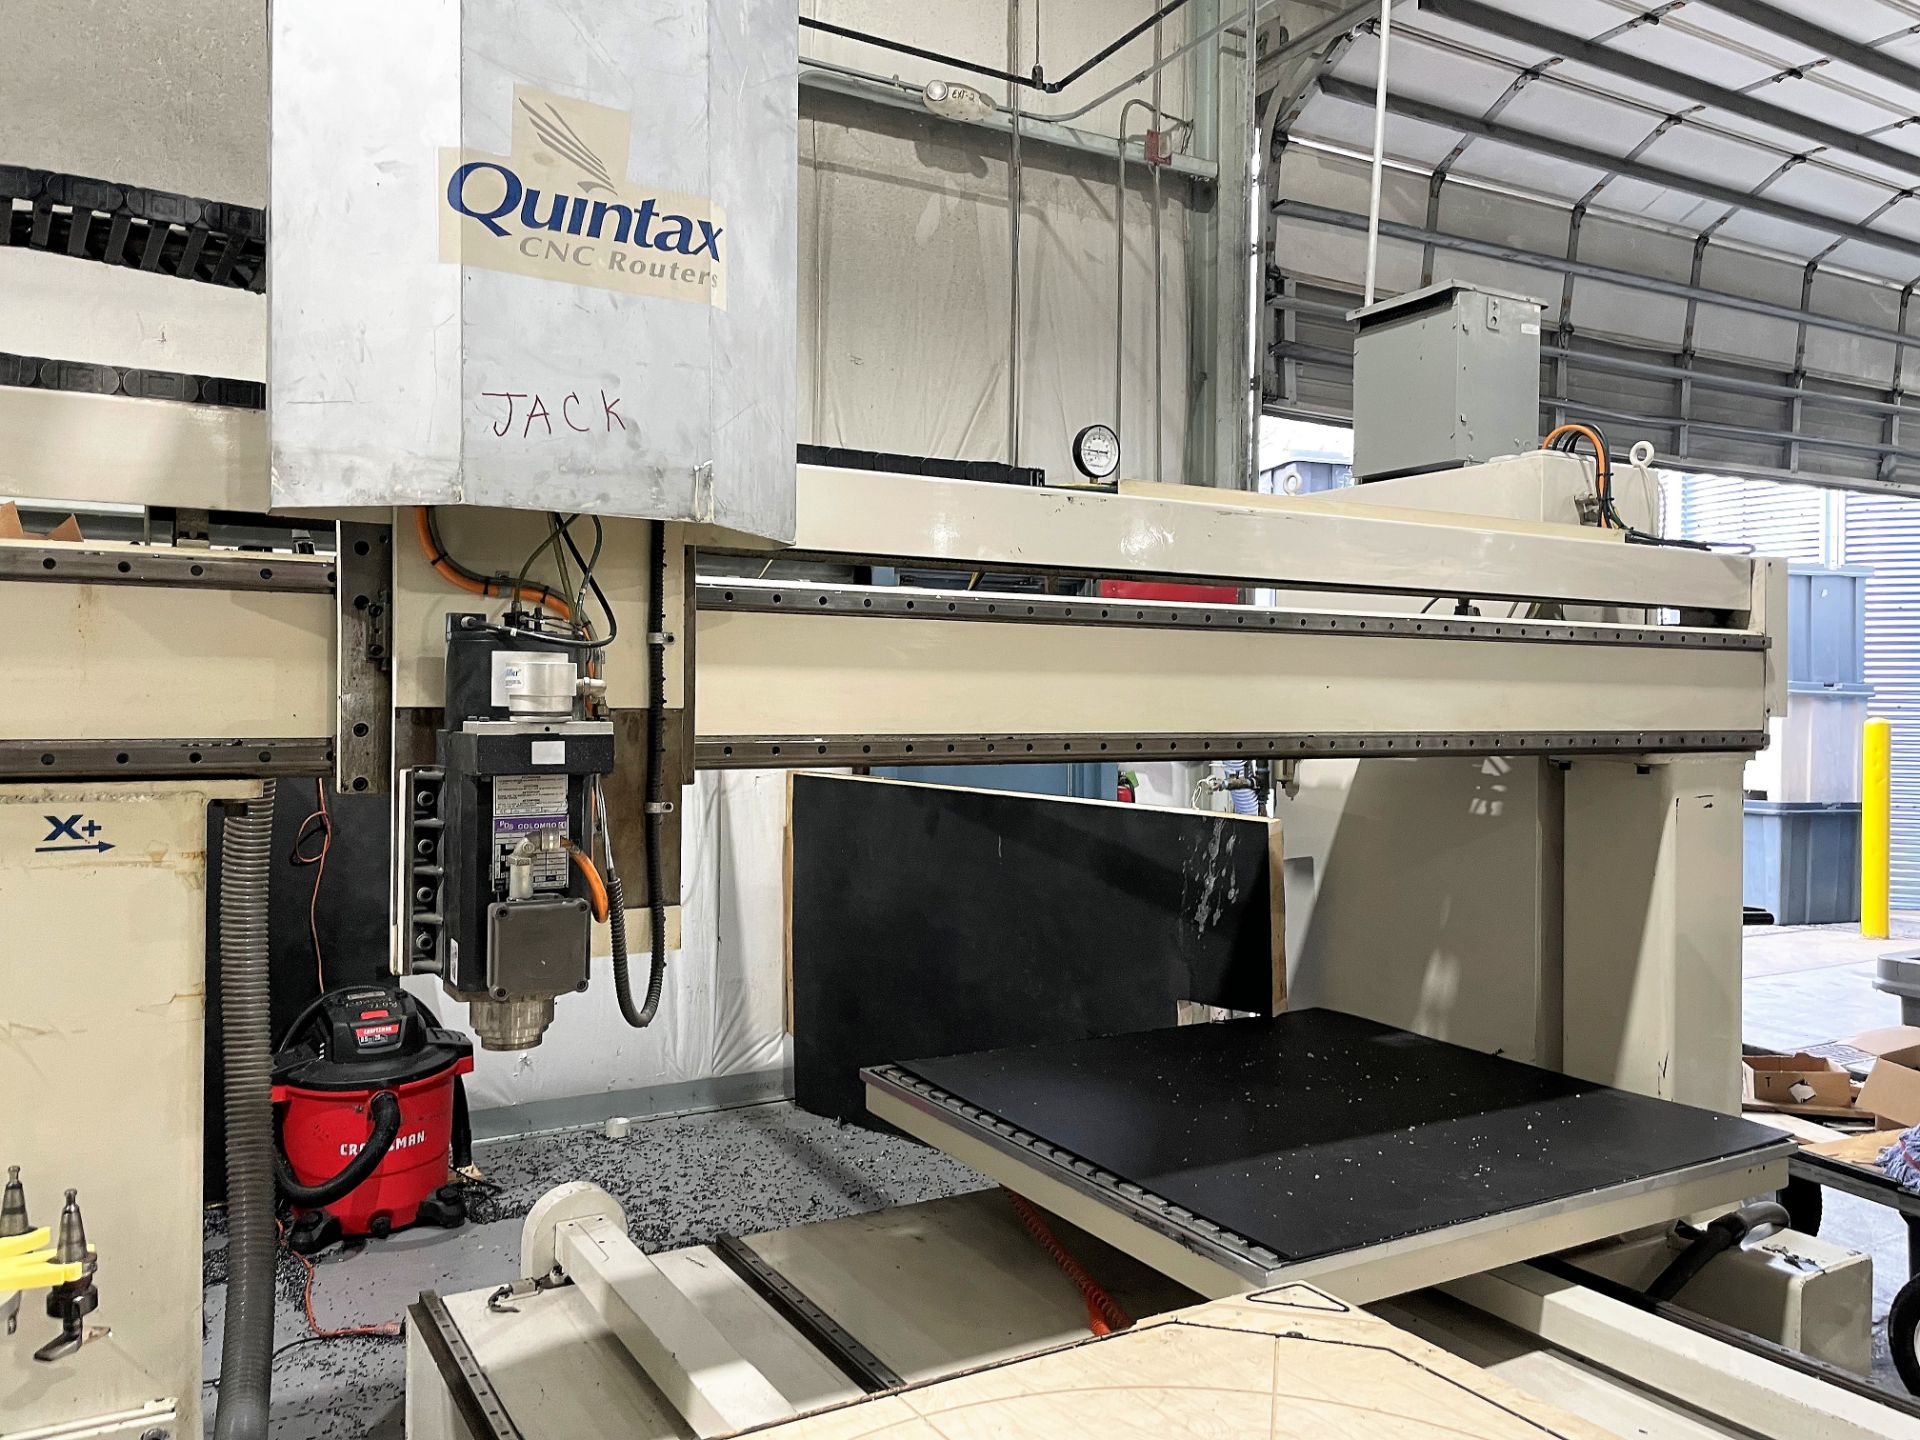 QUINTAX Q3M 3-AXIS DUAL 5X5 TABLES CNC ROUTER, S/N Q-1123, NEW 2009 - Image 6 of 9